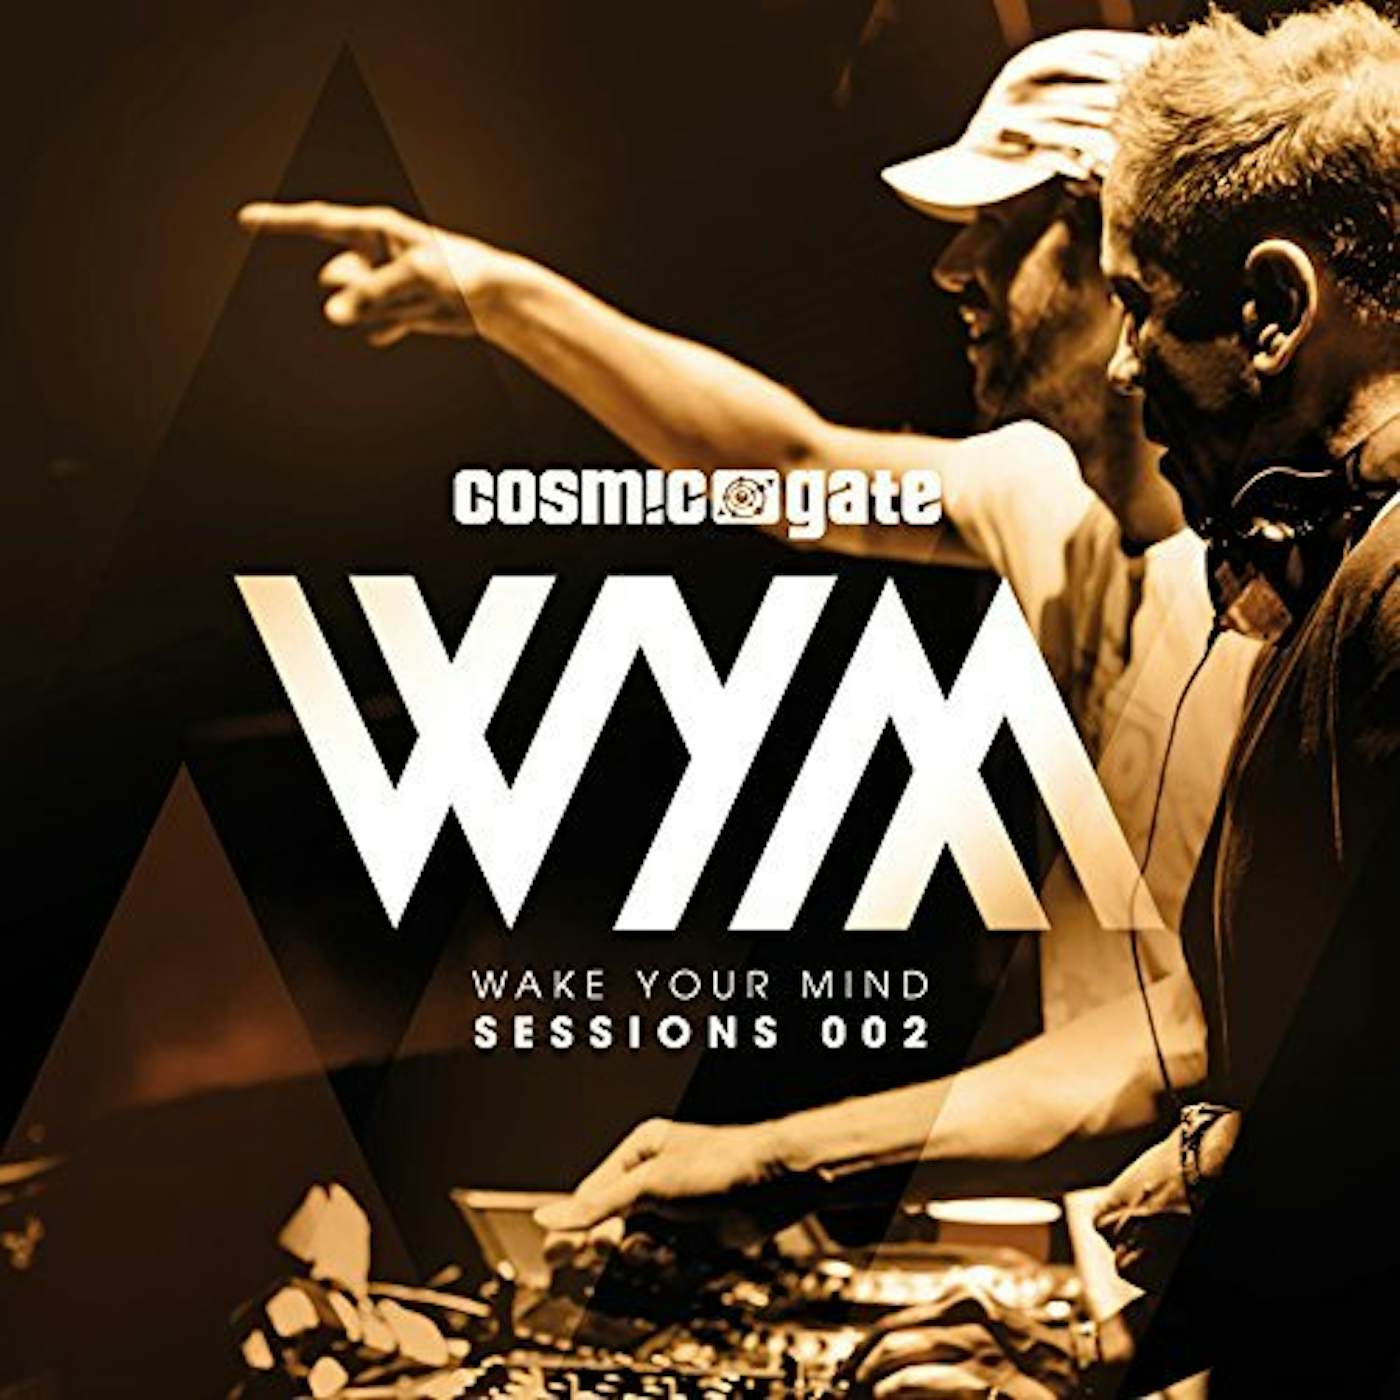 Cosmic Gate WAKE YOUR MIND SESSION 002 CD